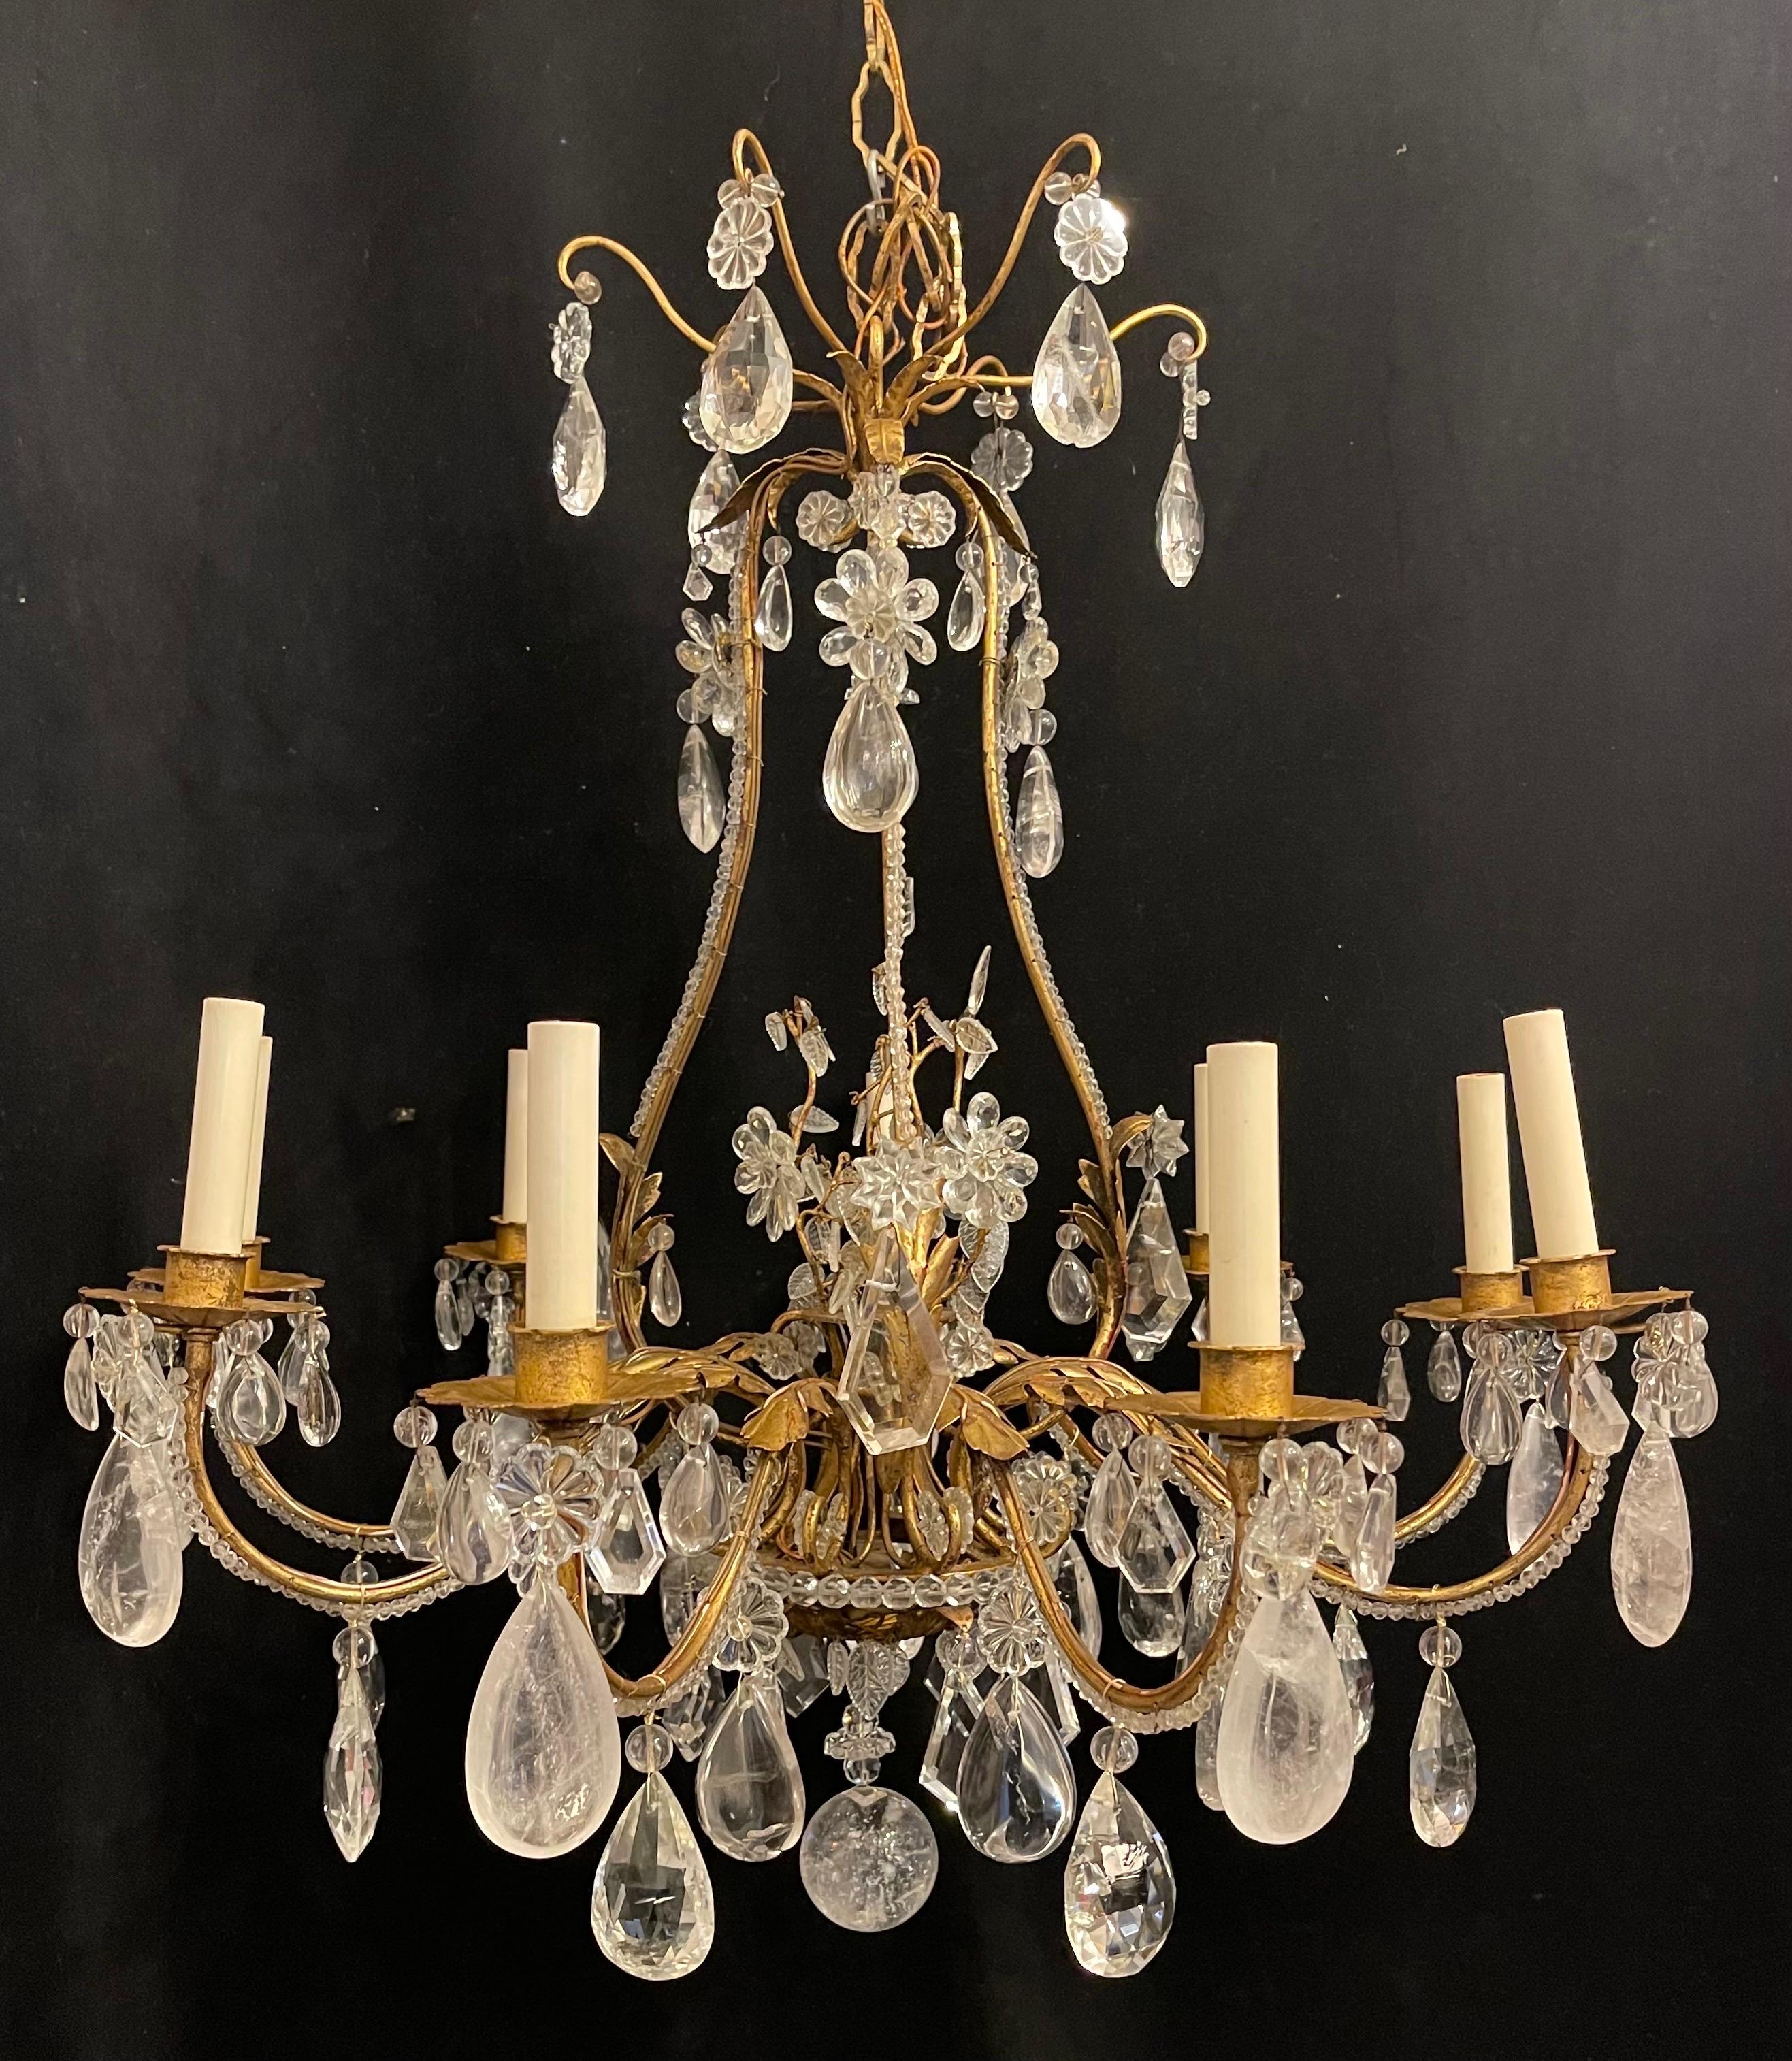 A Beautiful Gilt Rock Crystal Leaf Basket Form Chandelier In The Manner Of, Vaughan, Baguès, Jansen This Chandelier Has 9 Candelabra Lights And Comes Ready To Install With Chain Canopy And Mounting Hardware.